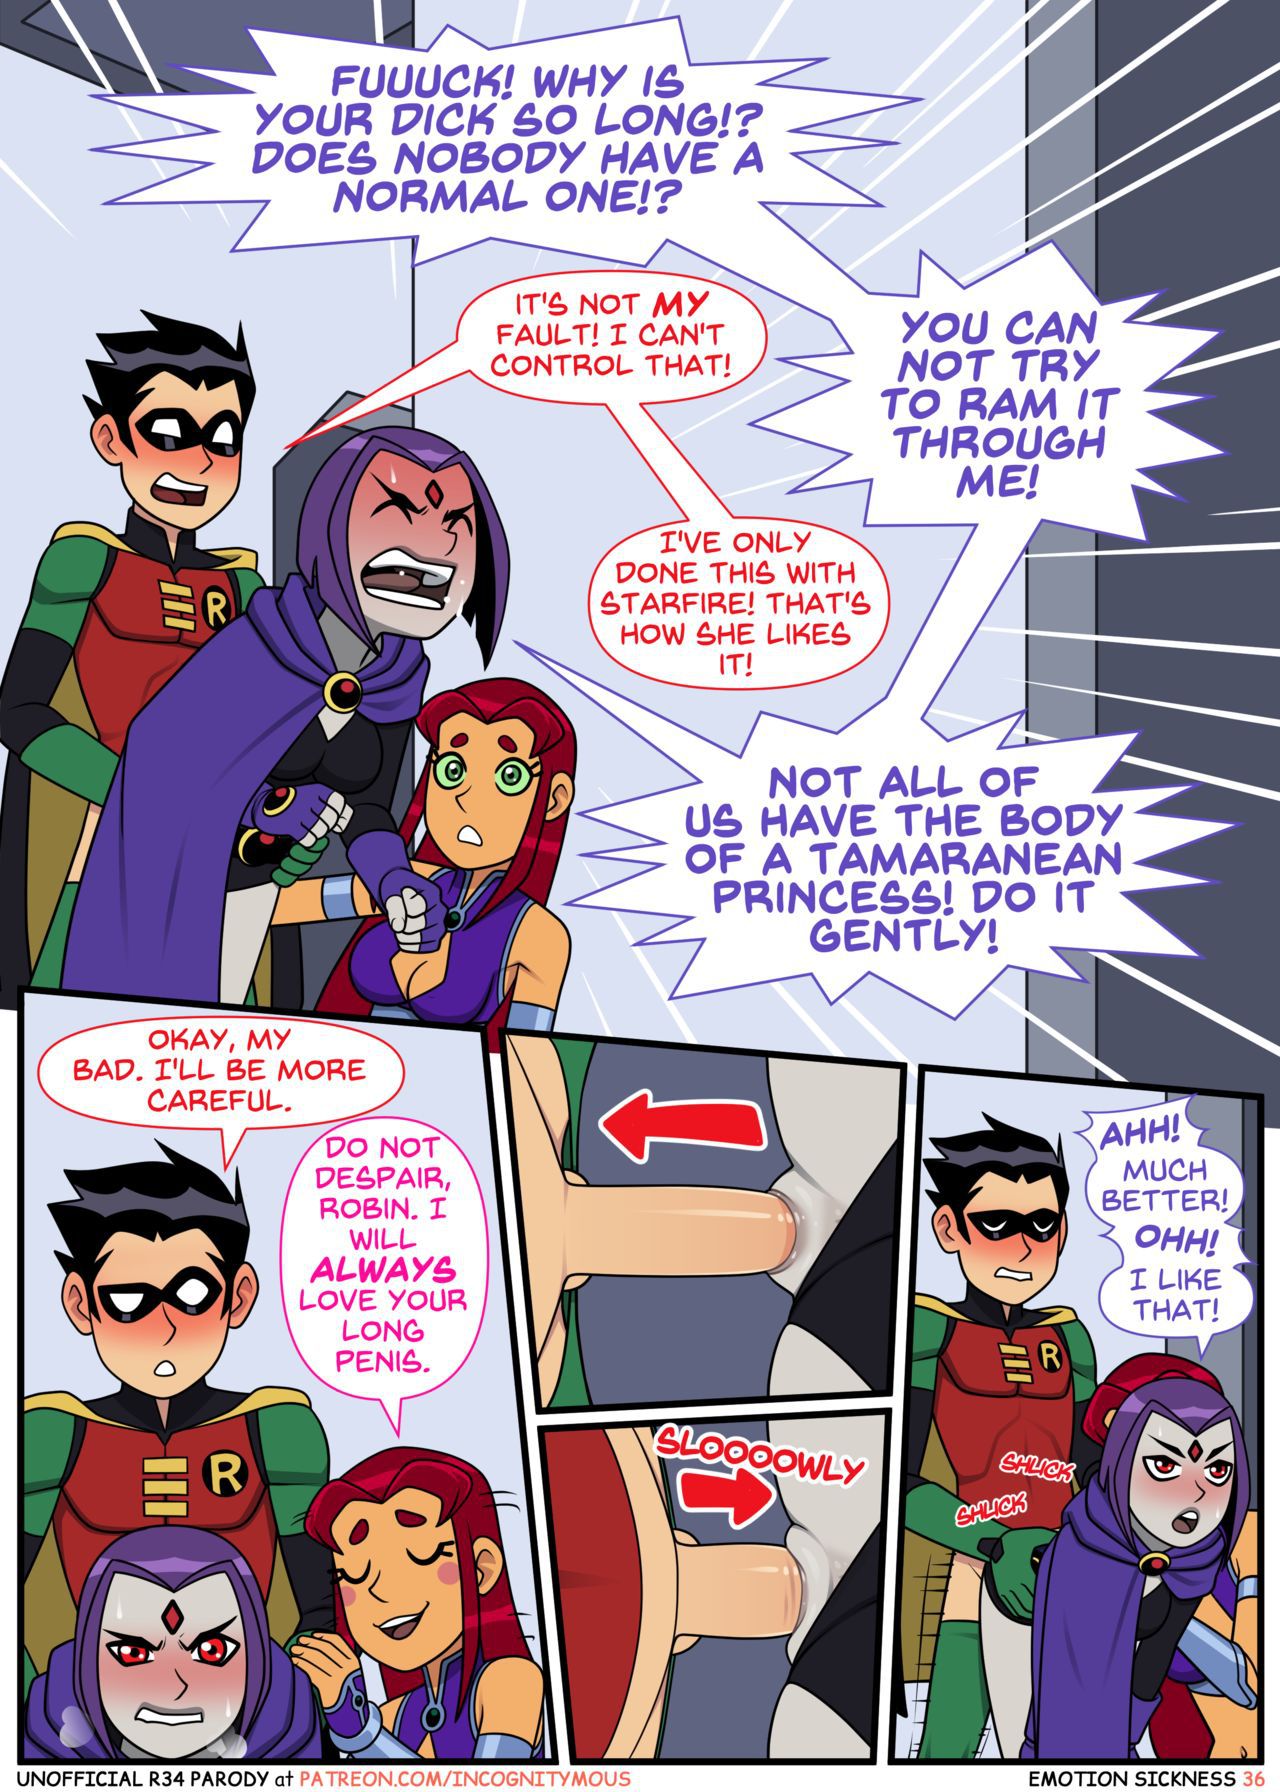 [Incognitymous] Emotion Sickness (Teen Titans) [Ongoing] 35